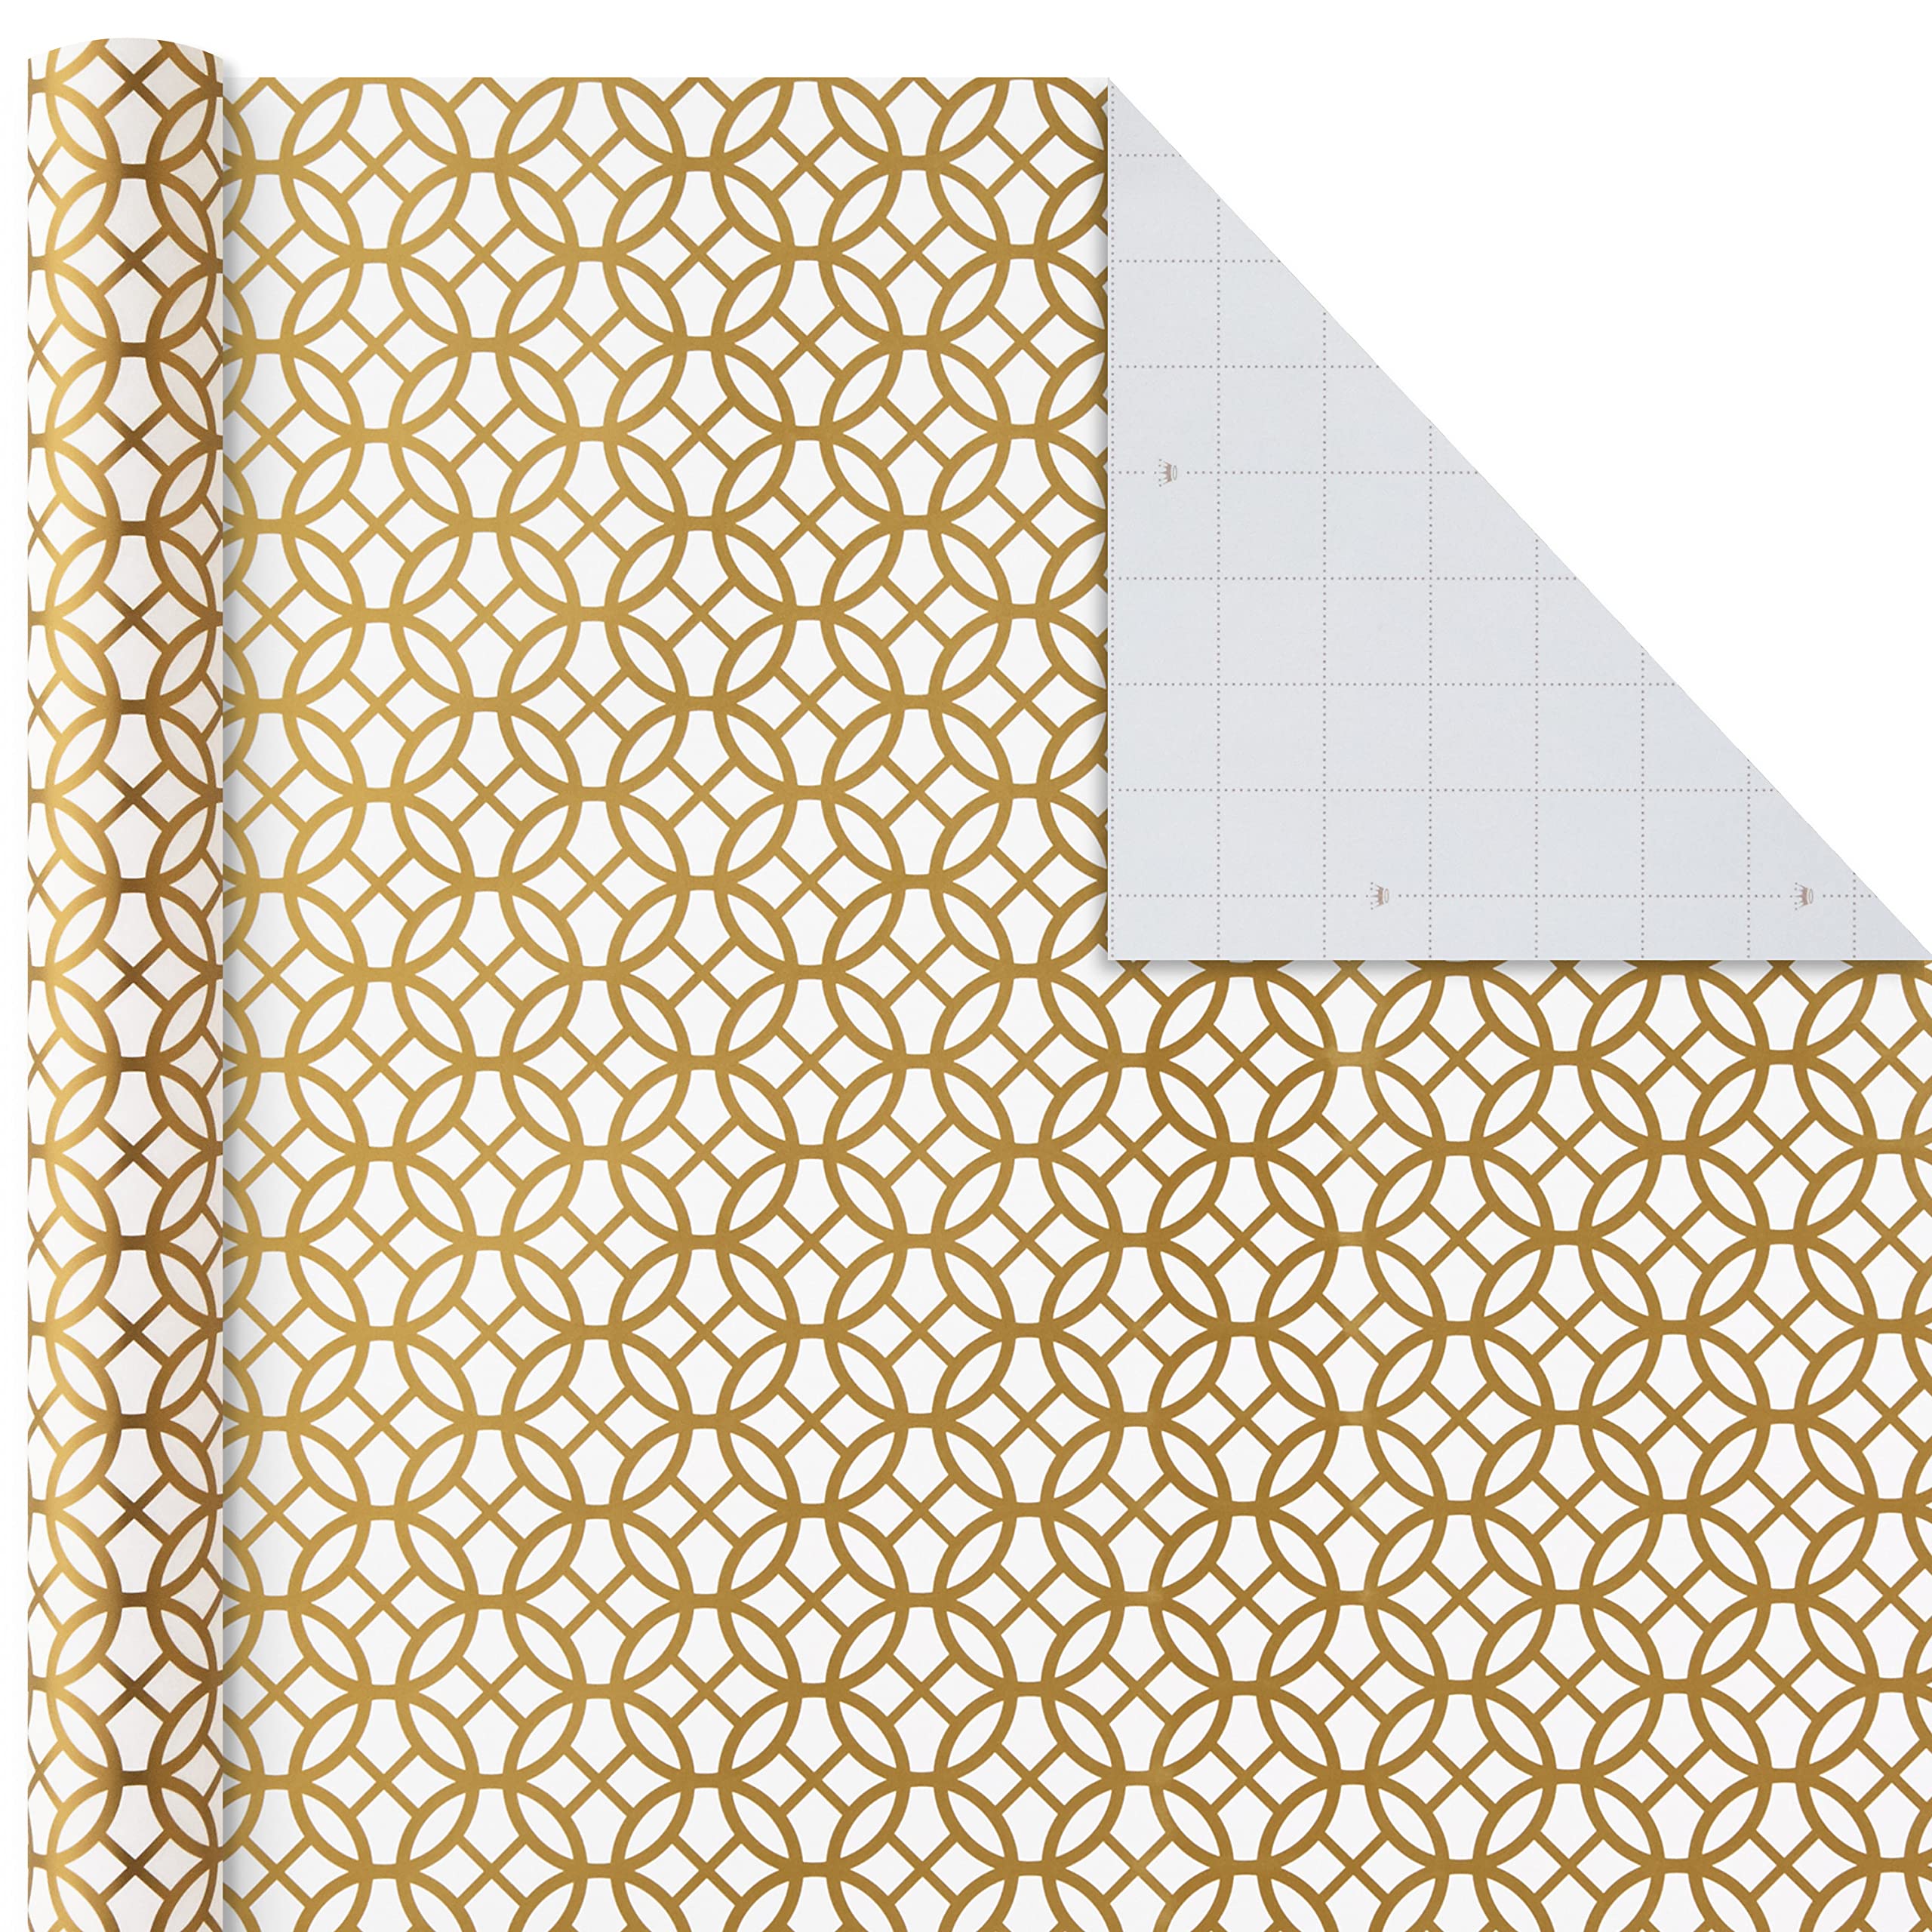 Hallmark All Occasion Wrapping Paper Bundle with Cut Lines on Reverse (Pack of 6, 180 sq. ft. ttl.) Happy Birthday, Polka Dots, Flowers and More for Birthdays, Holidays, Weddings and Everyday Celebrations